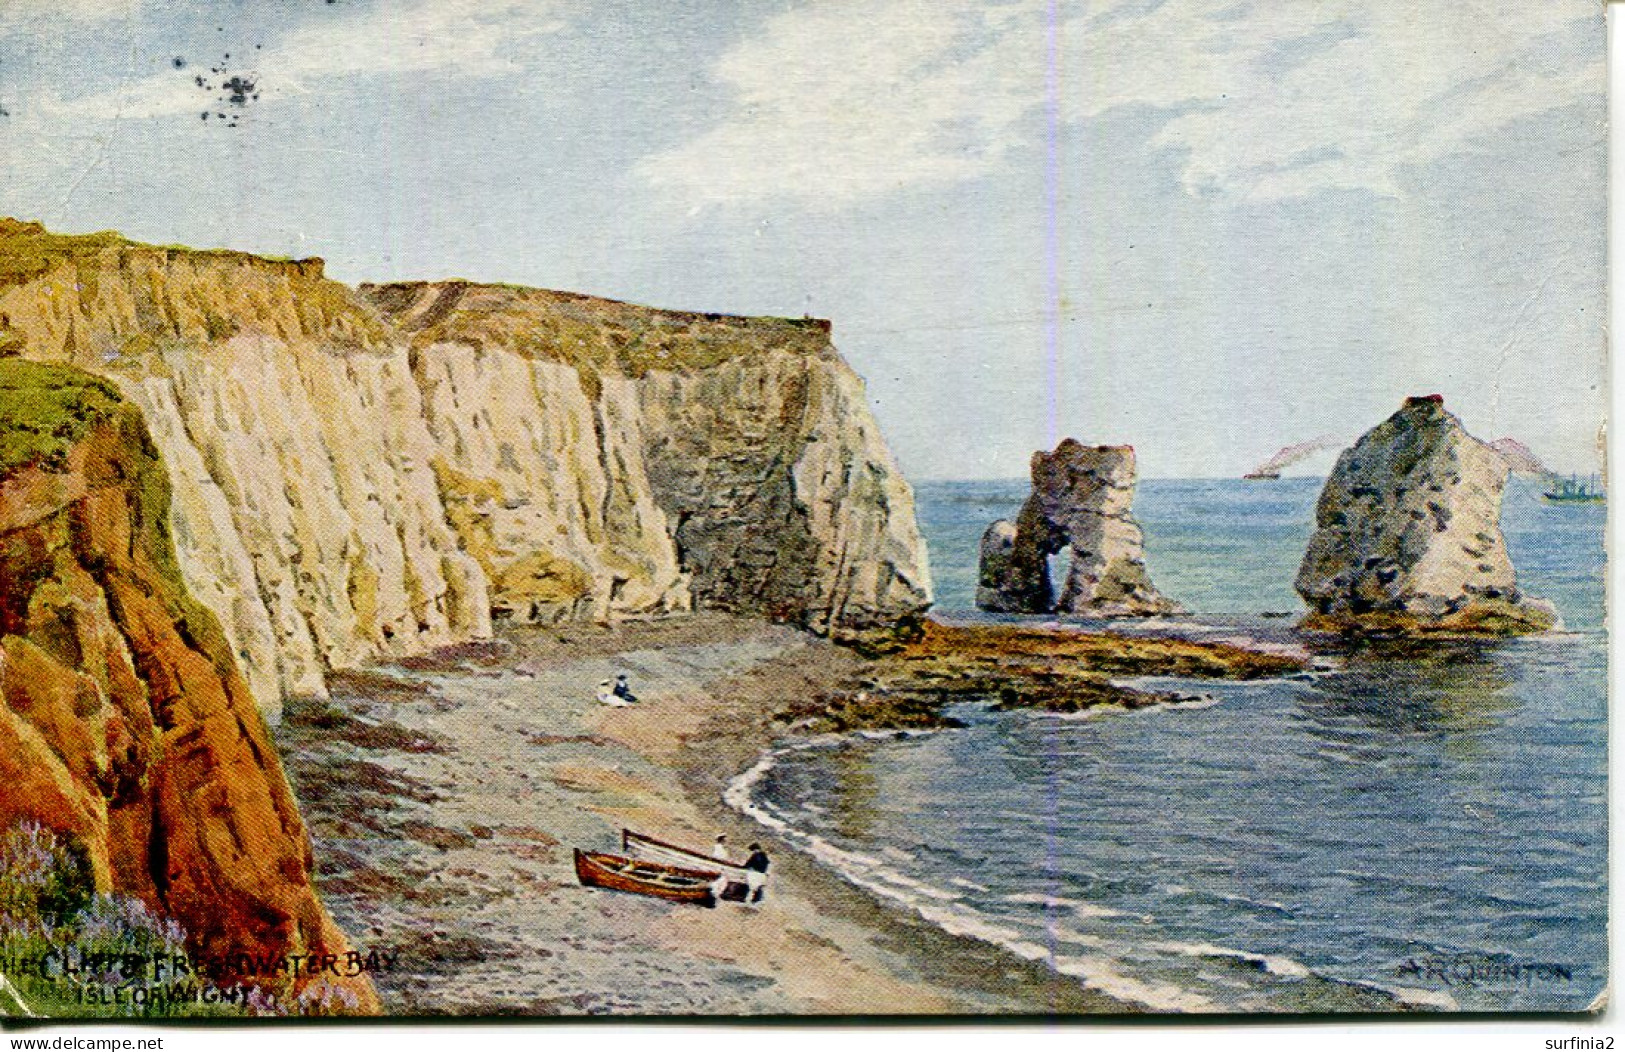 A R QUINTON - SALMON 1643 - THE CLIFFS, FRESHWATER BAY, ISLE OF WIGHT - Quinton, AR